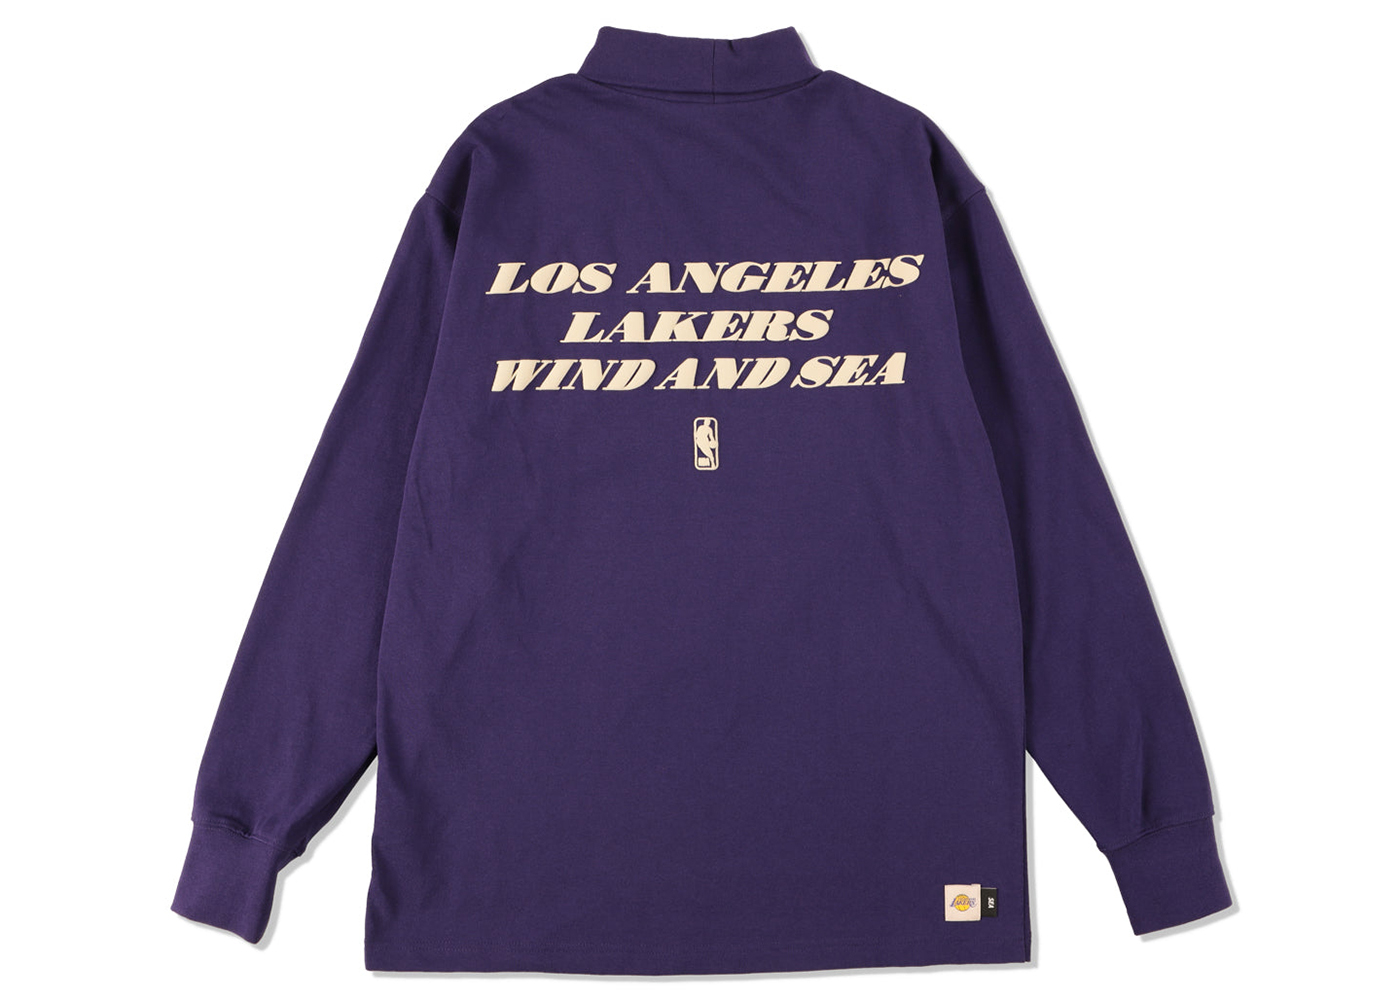 Wind and Sea NBA Turtle Neck L/S Tee Losangeles Lakers - SS23